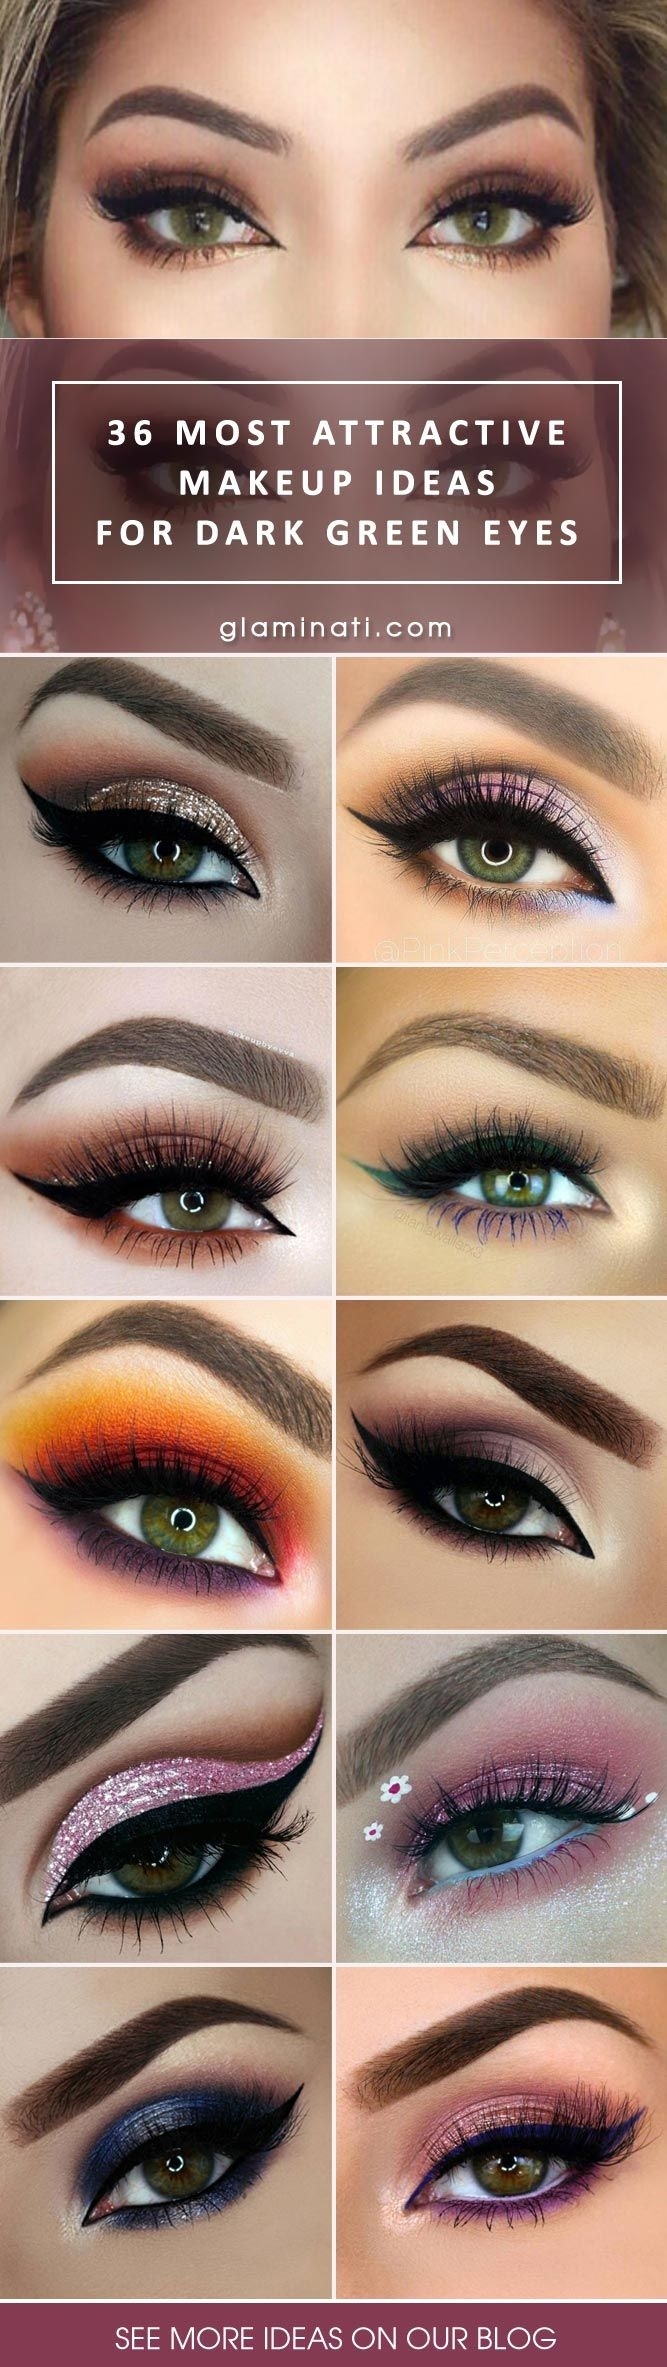 42 Most Attractive Makeup Ideas For Dark Green Eyes | Makeup in Best Eyeshadow Colors For Dark Green Eyes